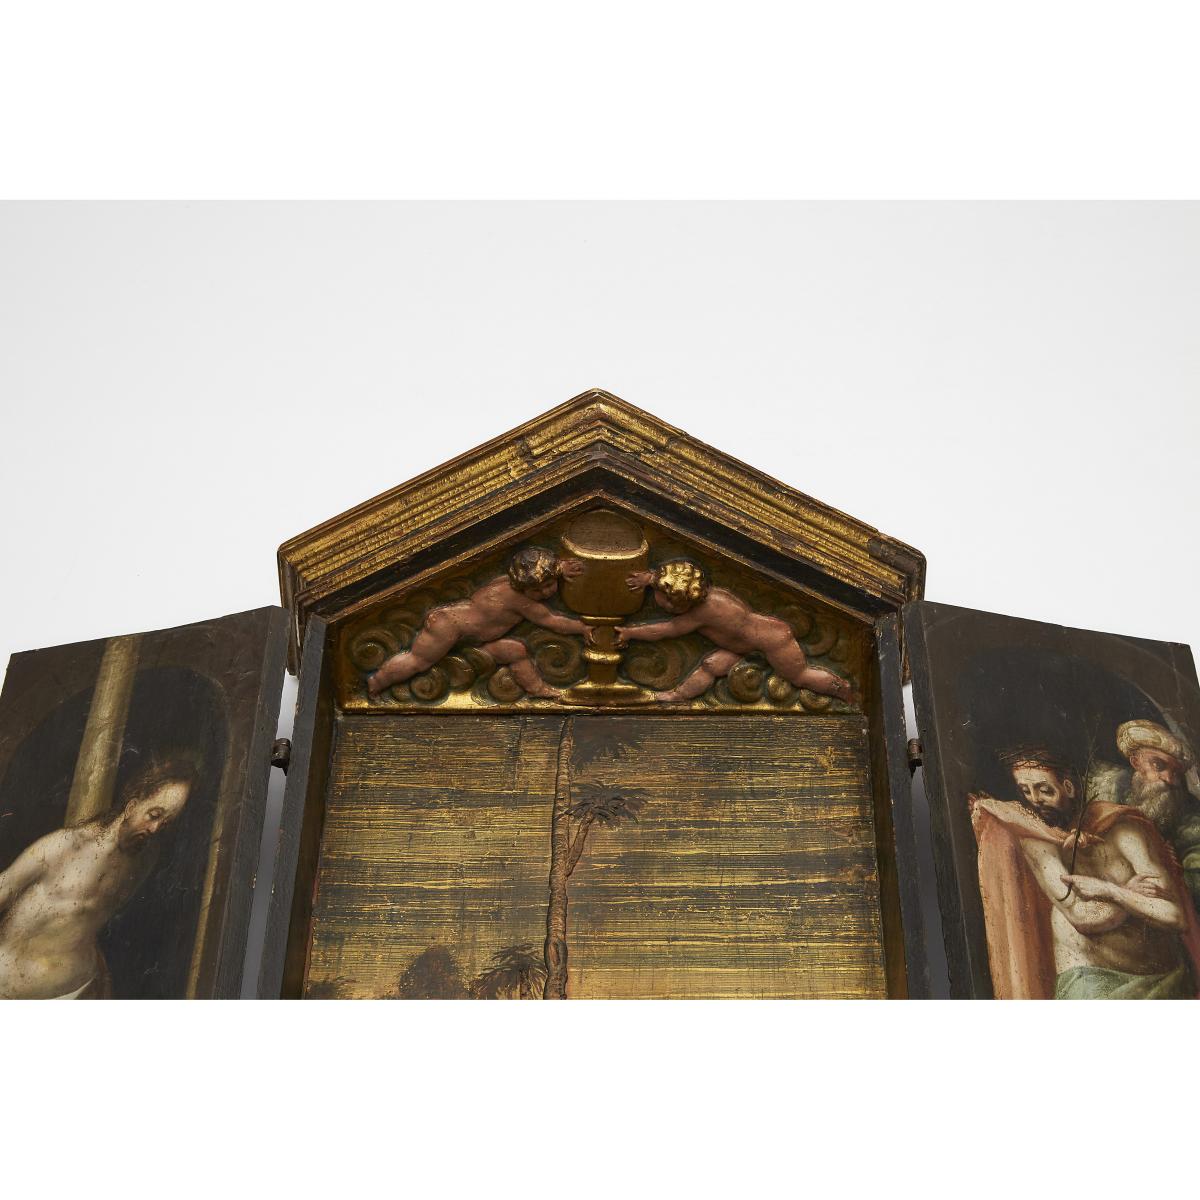 Italian Painted and Gilt Portable Triptych Altar, 17th century, height 32.25 in — 81.9 cm - Image 3 of 4